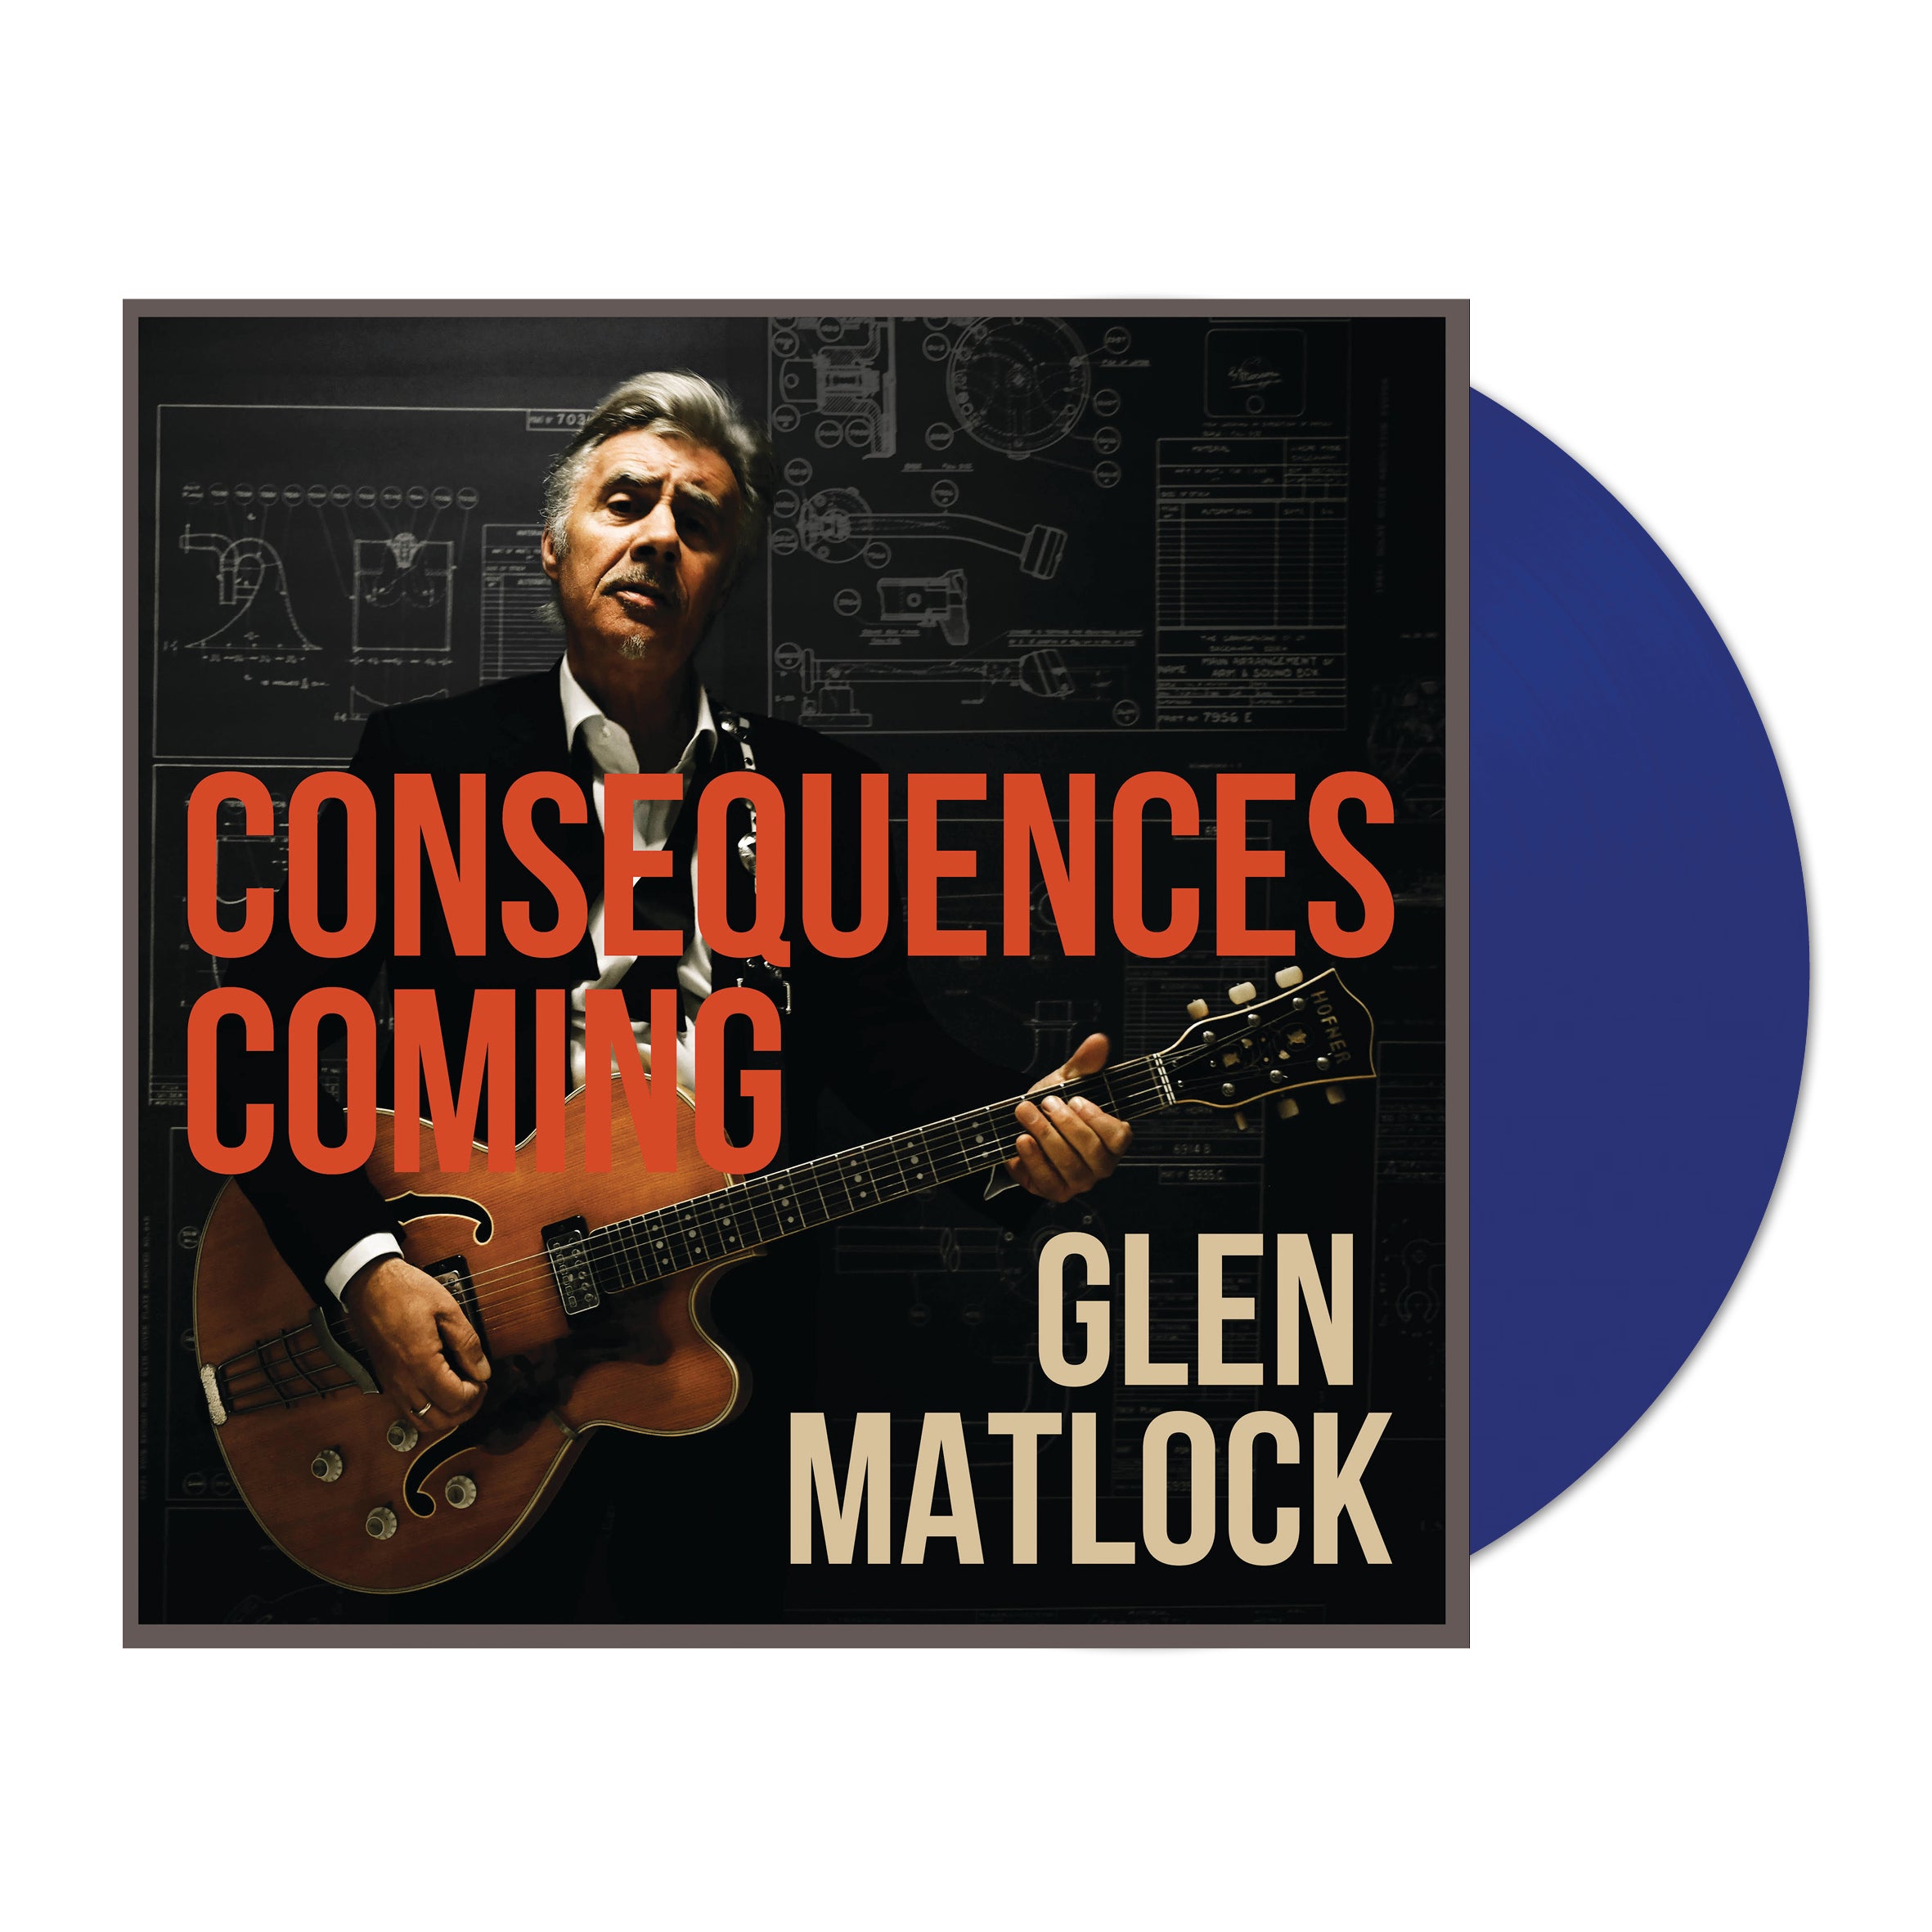 Glen Matlock (Sex Pistols) - Consequences Coming: The Sound Of Vinyl Exclusive Signed Ultra Blue Vinyl LP [Limited To 300]